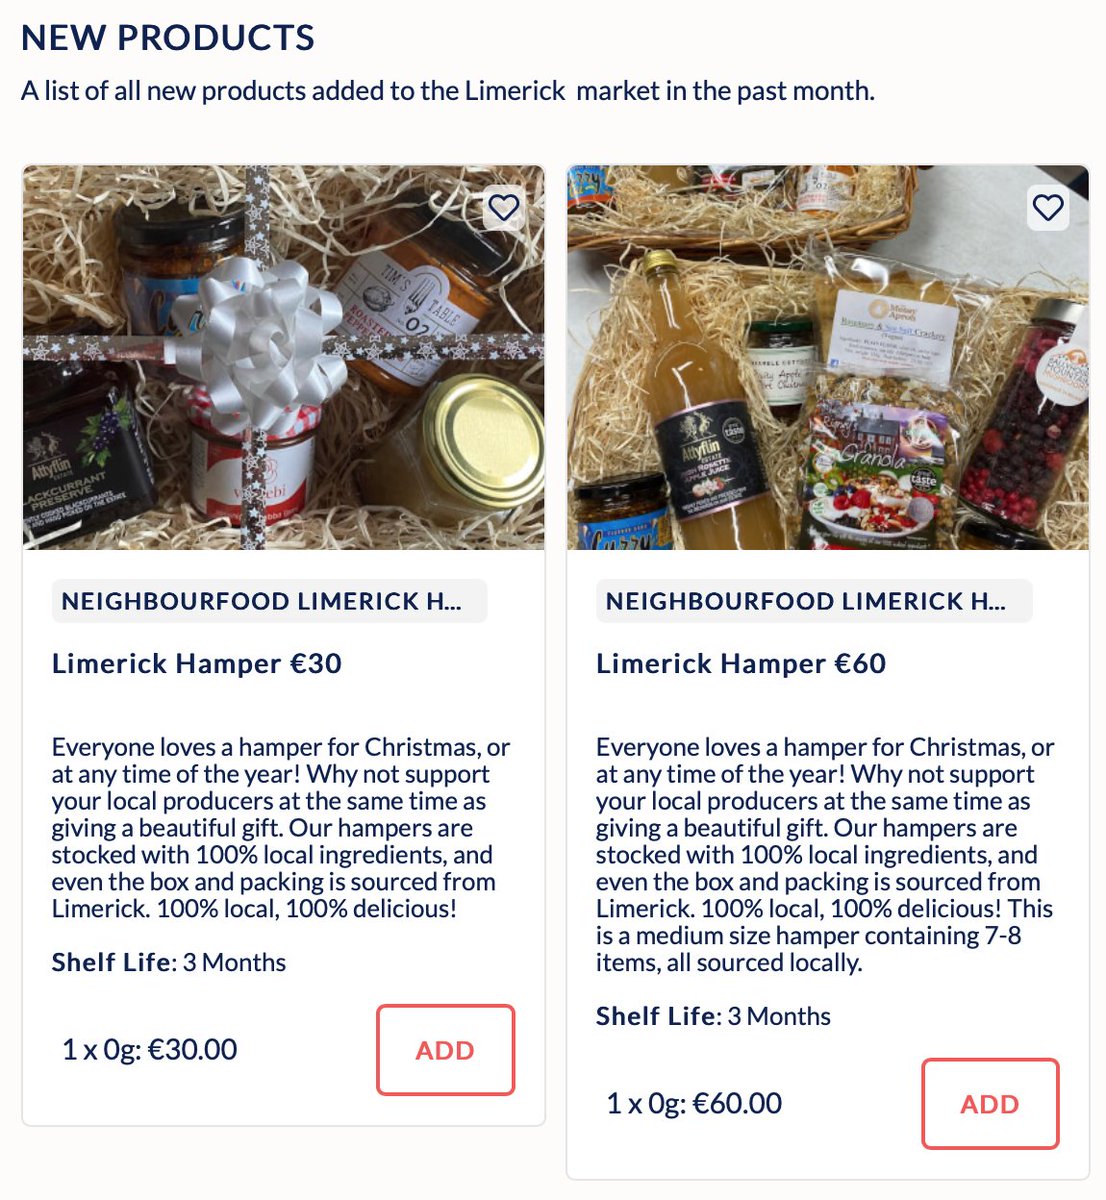 Love to see these new Limerick Hampers now available from @NeighbourfoodL - we have amazing food and drinks producers across the city and county, this is a fabulous gift to give, or to receive! #limerickfood @LimerickFoodGrp @leo_limerick